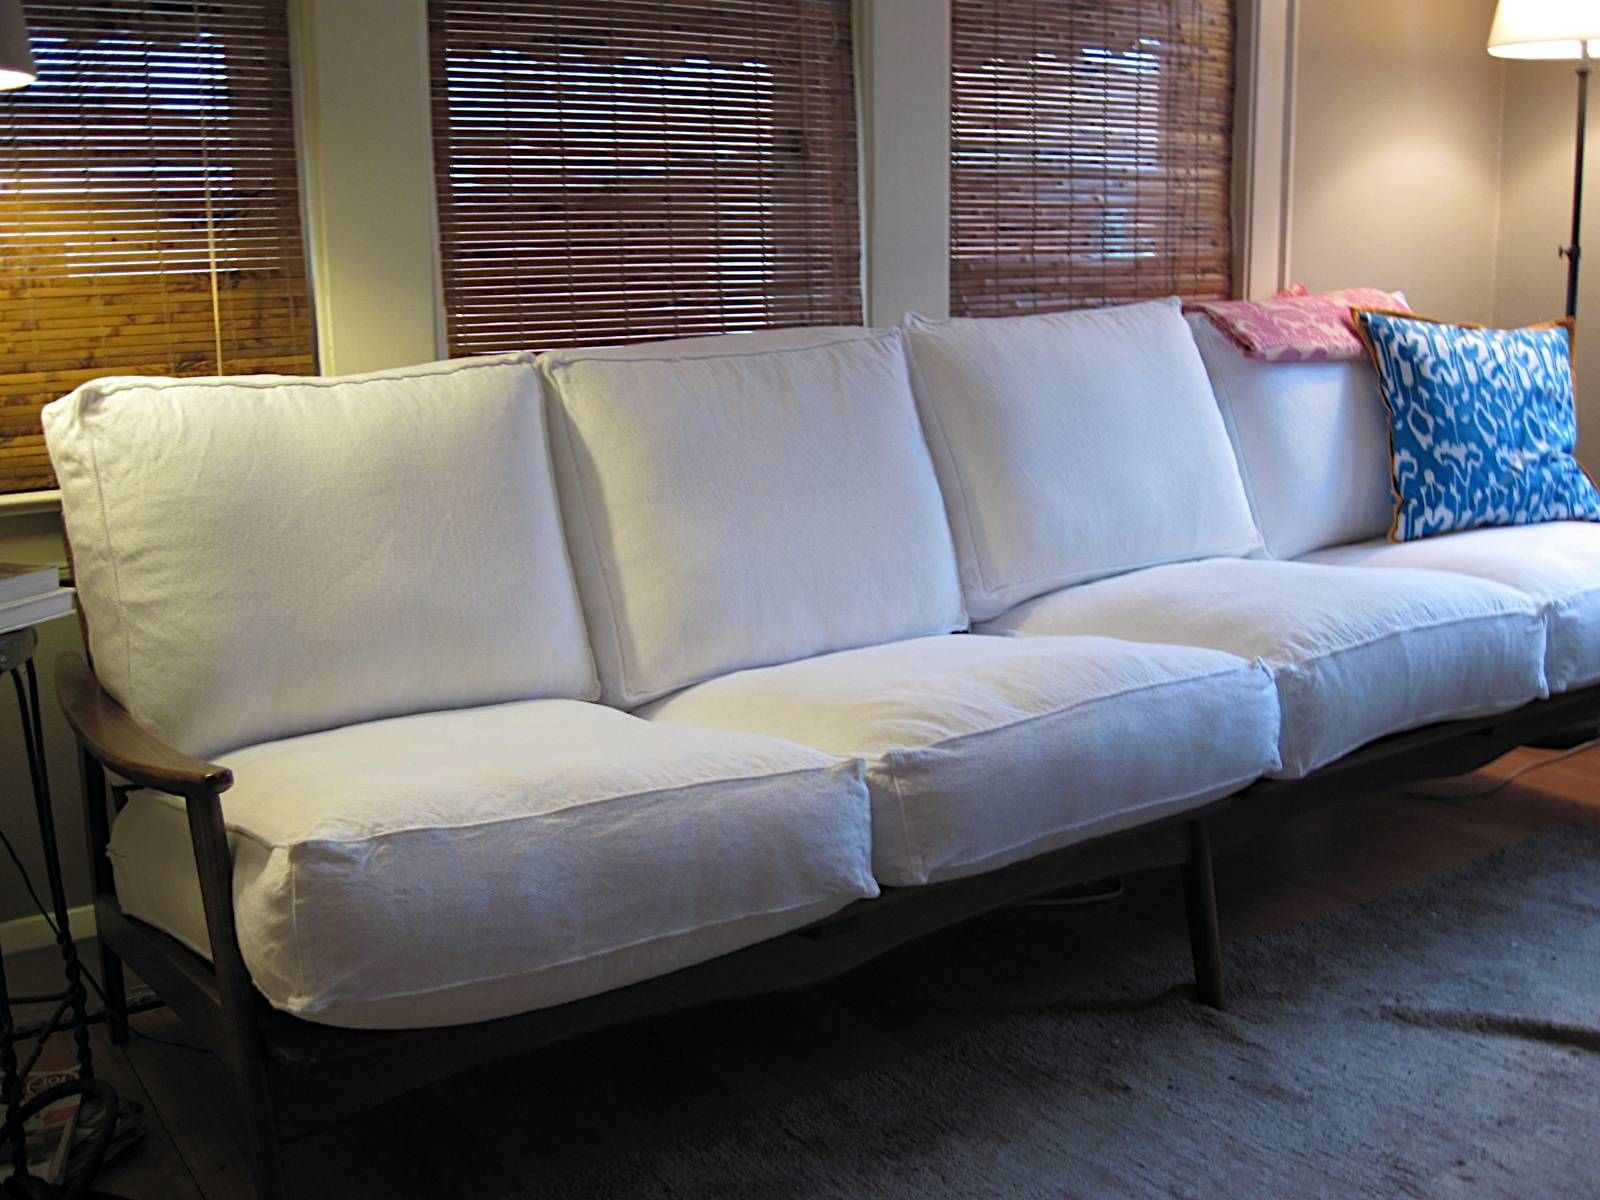 Breathing New Life Into An Old Wood Frame Couch | Bungalow Bungahigh For Lillberg Sofa Covers (View 7 of 30)